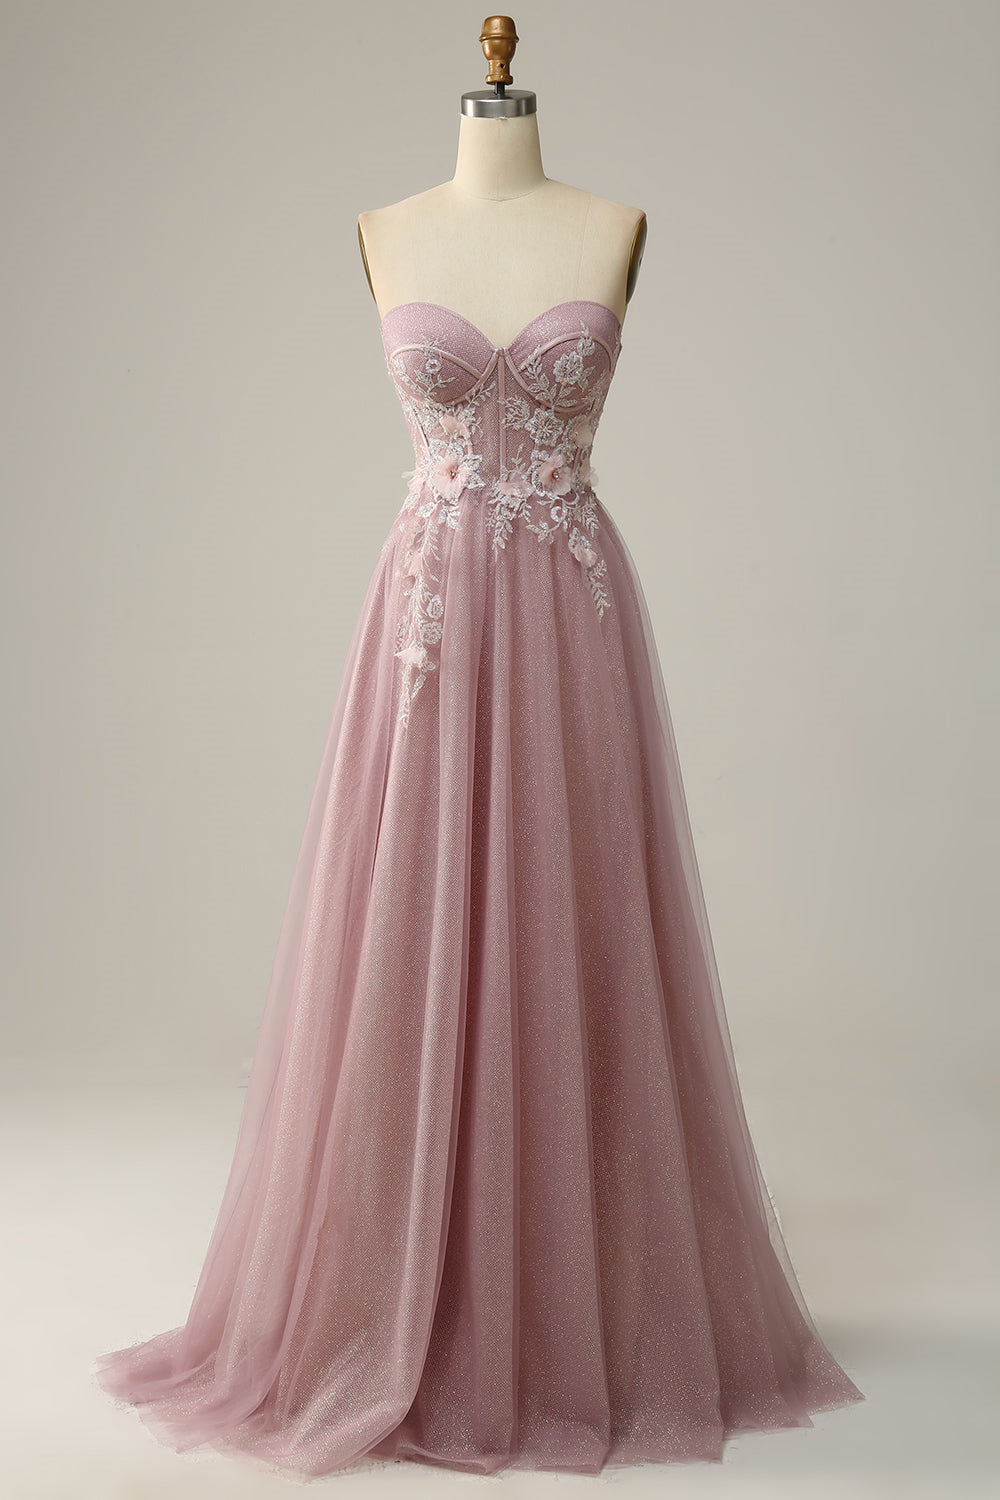 Blush Pink Strapless Sweetheart Appliques A-line Long Prom Dress